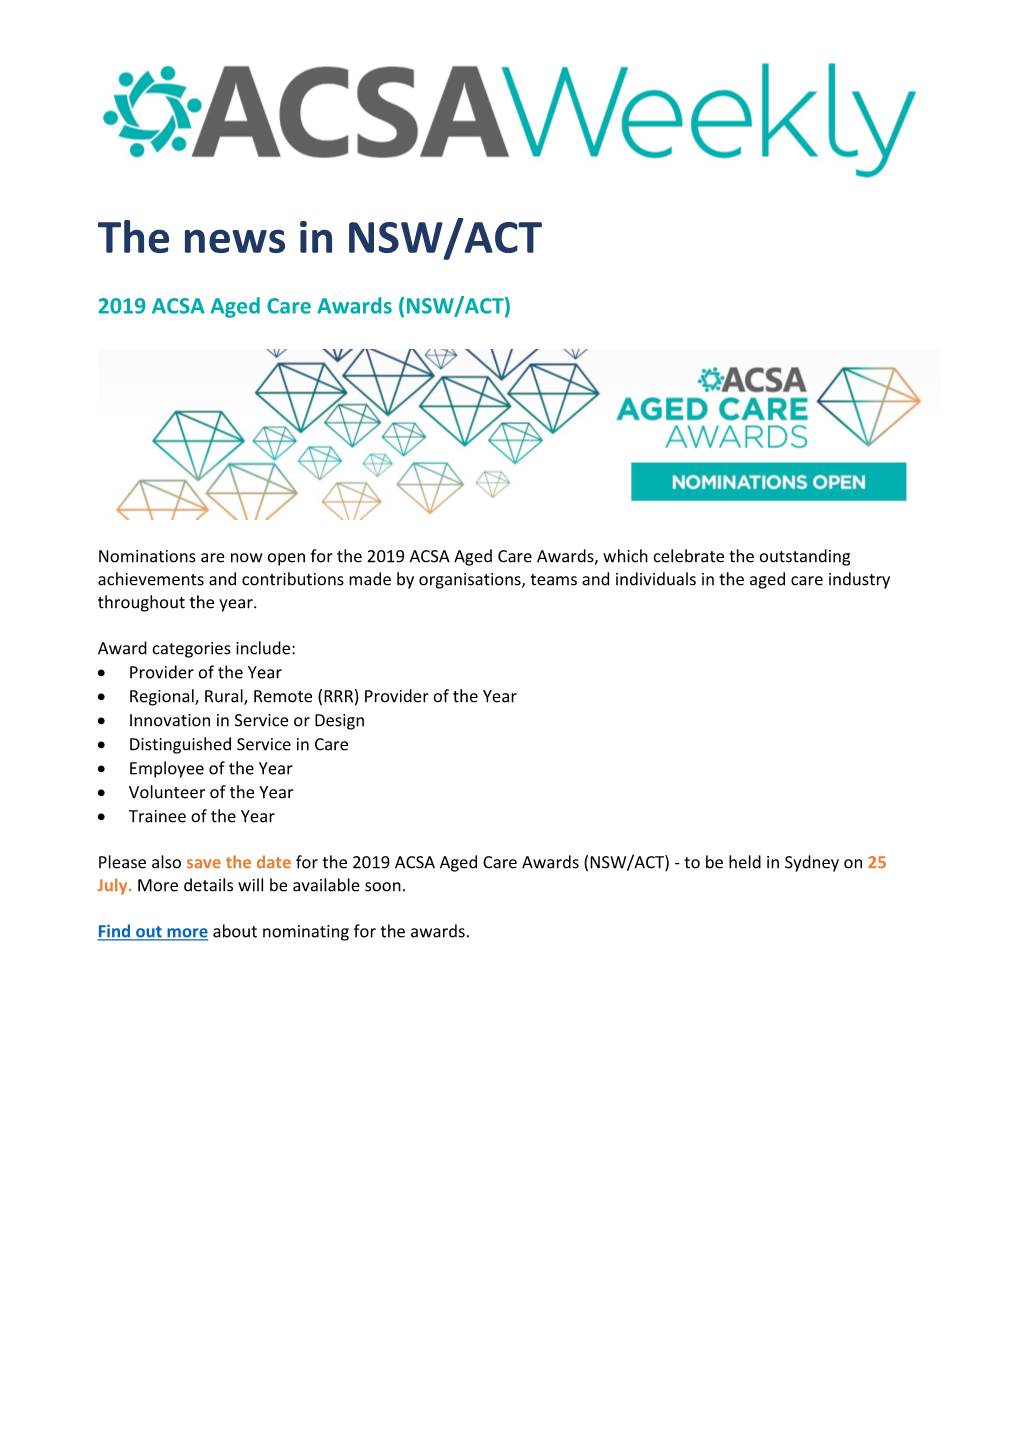 The News in NSW/ACT